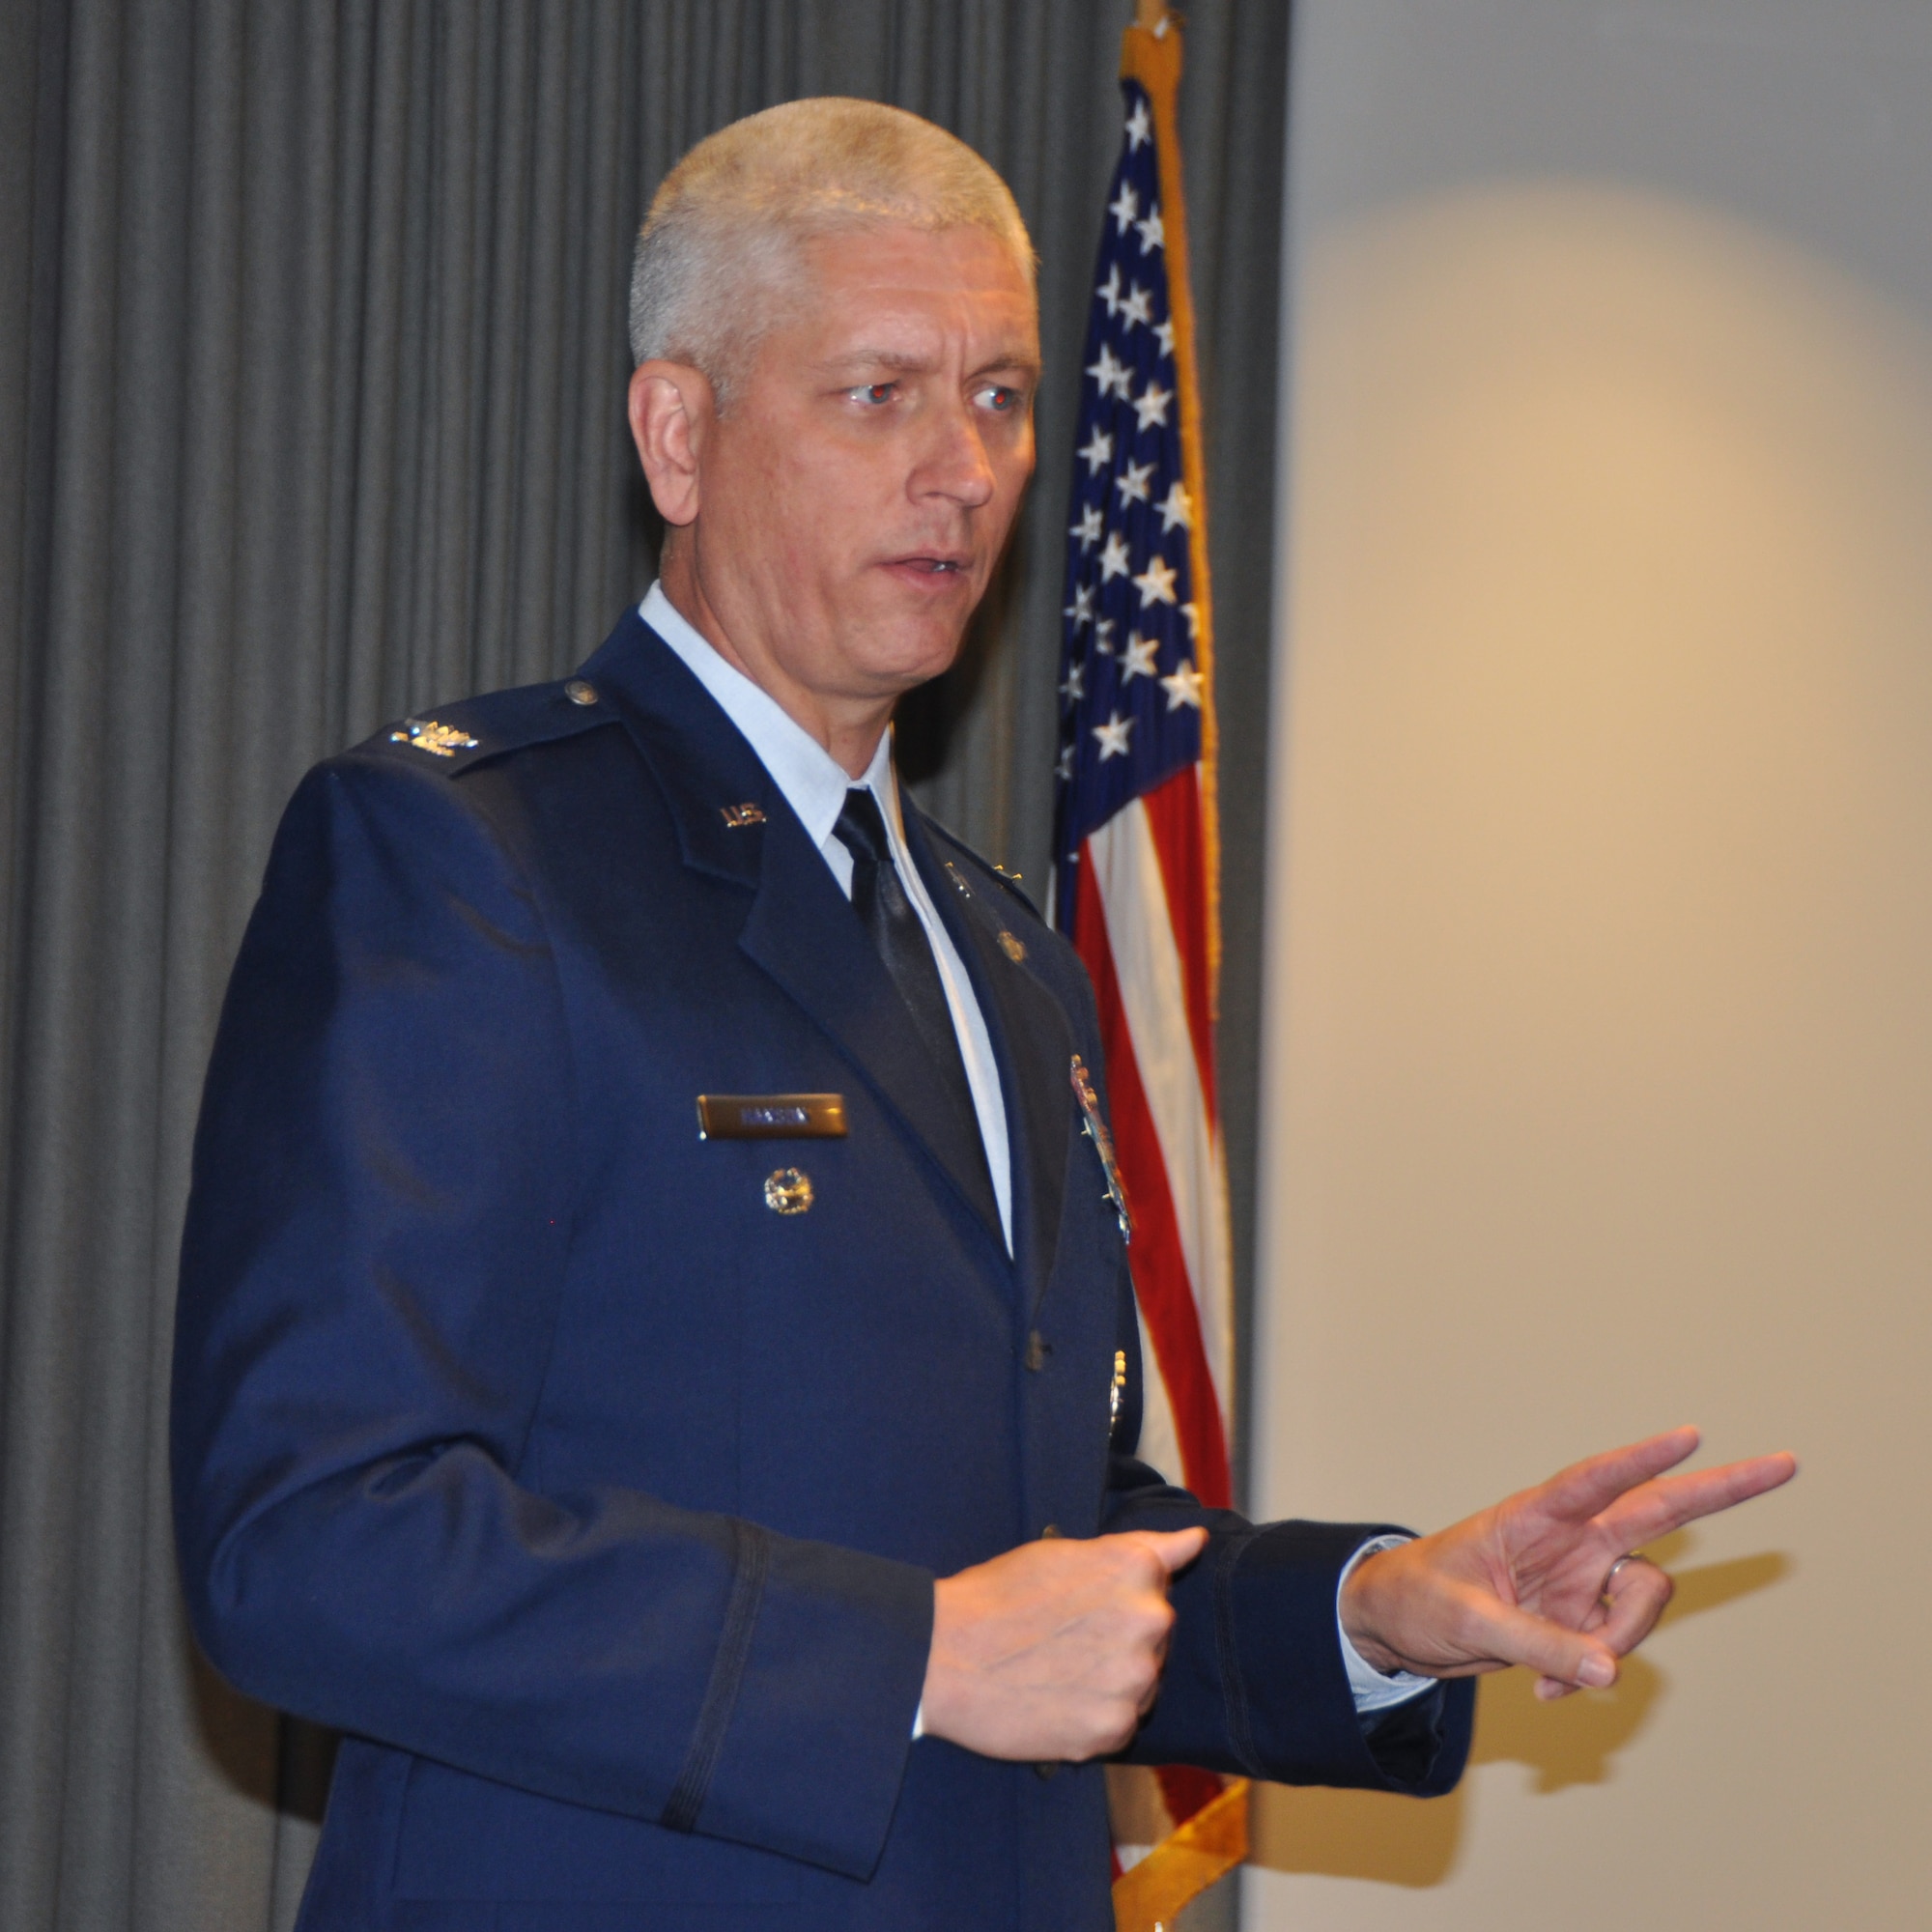 Col. David Hanson, 919th Special Operations Wing vice commander, makes remarks as featured speaker for the University of West Florida's Air Force ROTC Detachment 014 commencement and commissioning ceremony May 5, 2017 at Hurlburt Field, Fla.  Hanson, who likewise was  commissioned through the AFROTC, implored the new second lieutenants to find success by living the Air Force core values, maintaining balance in their lives and actively building on their leadership foundation. (U.S. Air Force photo/Dan Neely)